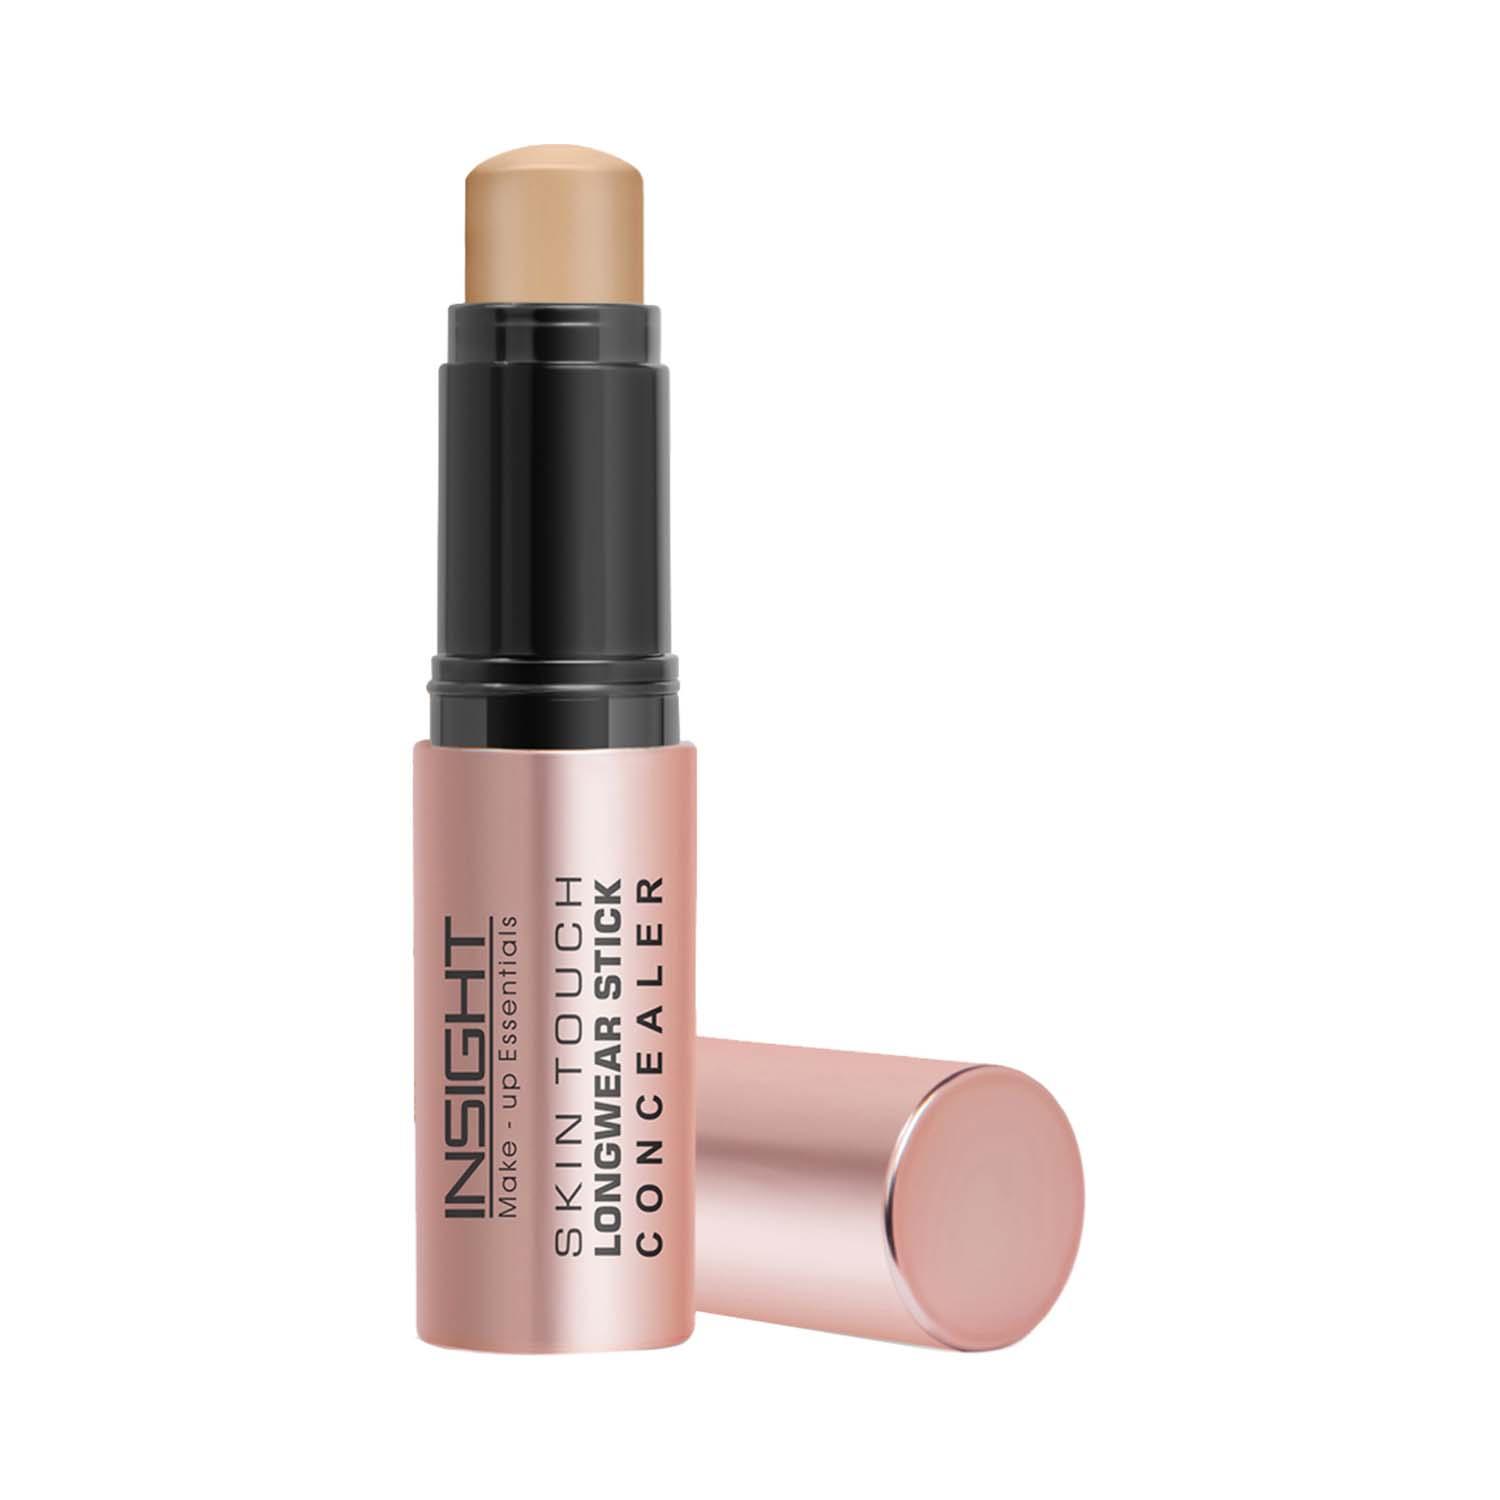 Insight Cosmetics | Insight Cosmetics Skin Touch Longwear Concealer - MN20 (5 g)